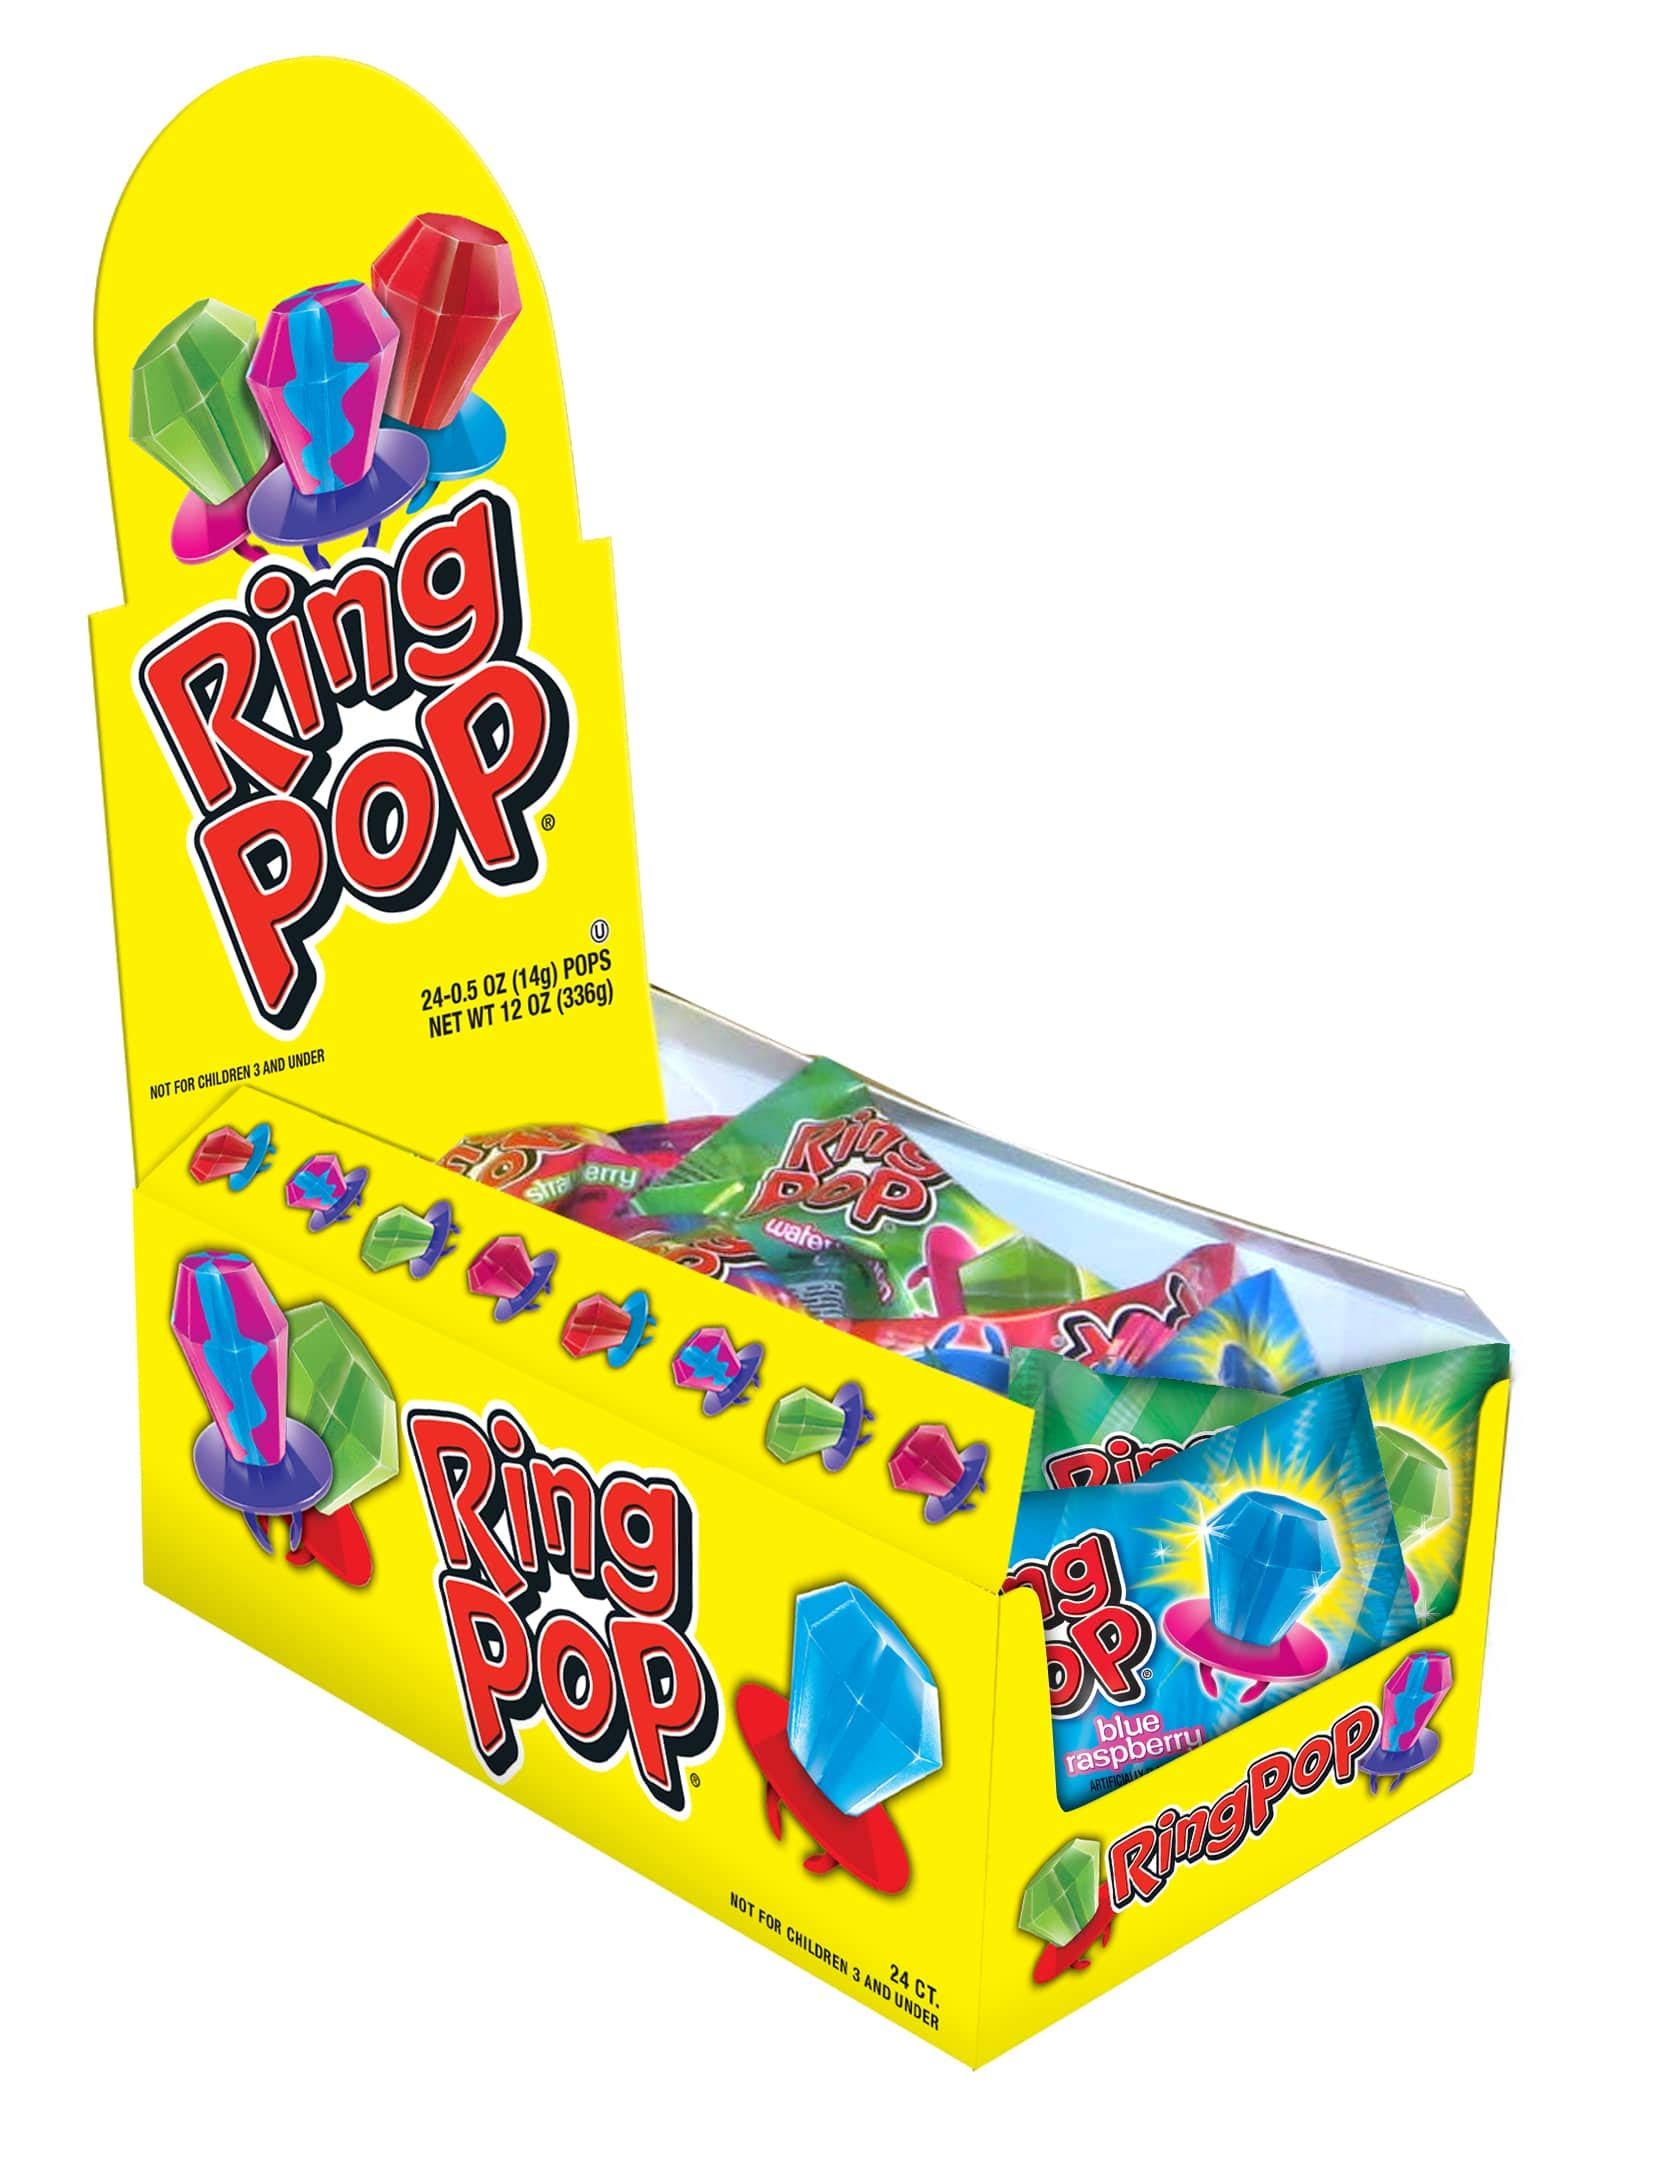 Topps Ring Pop Twisted Fruit Pop Candy